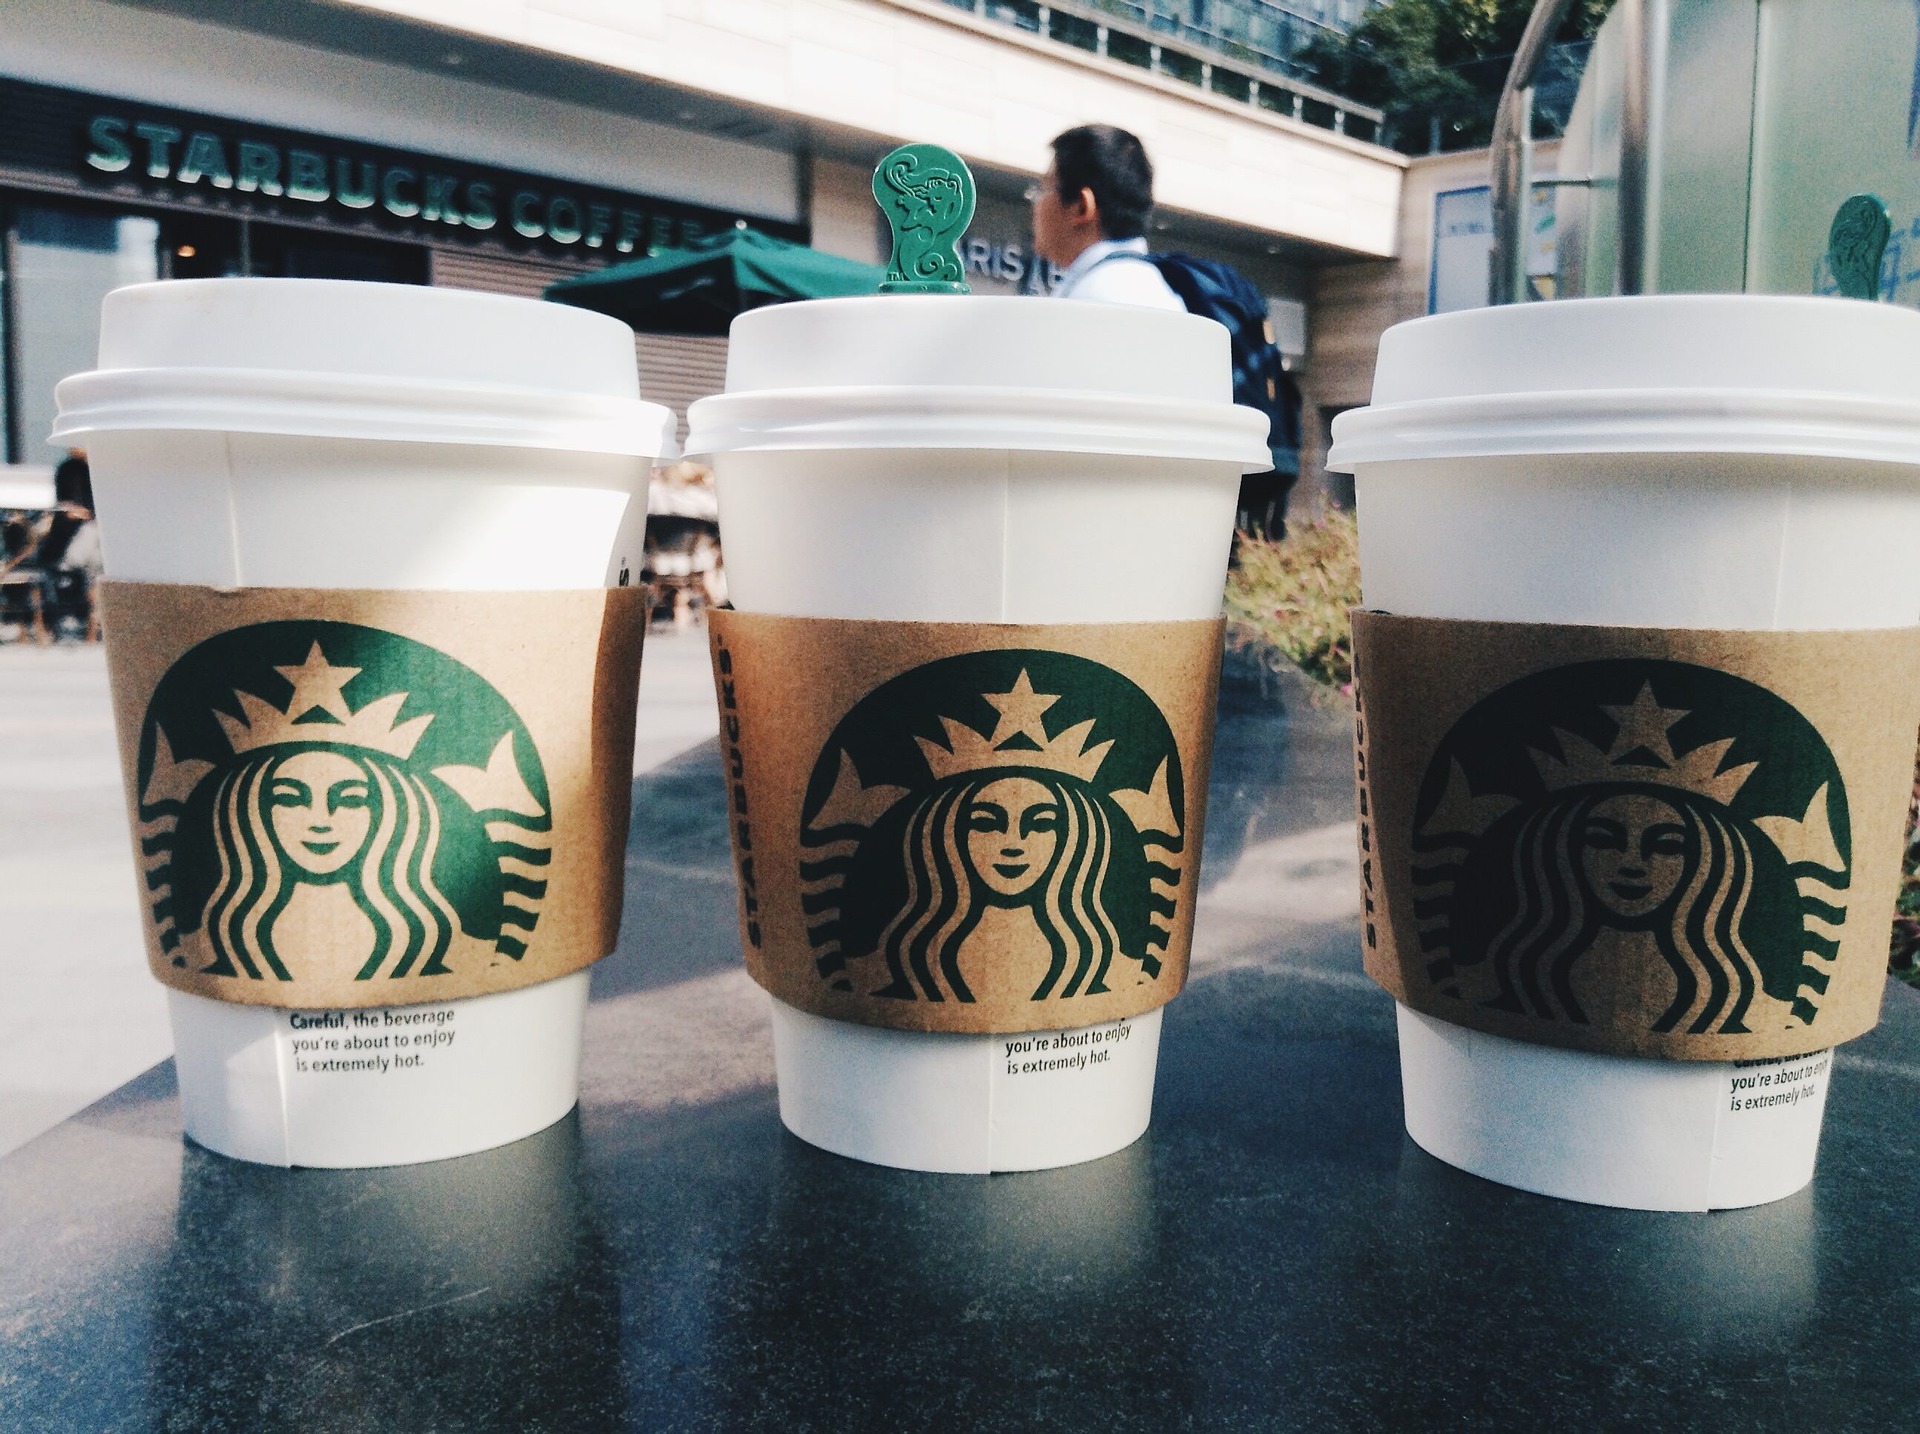 Starbucks requested by 206 UVic students and staff, 2015 survey data shows